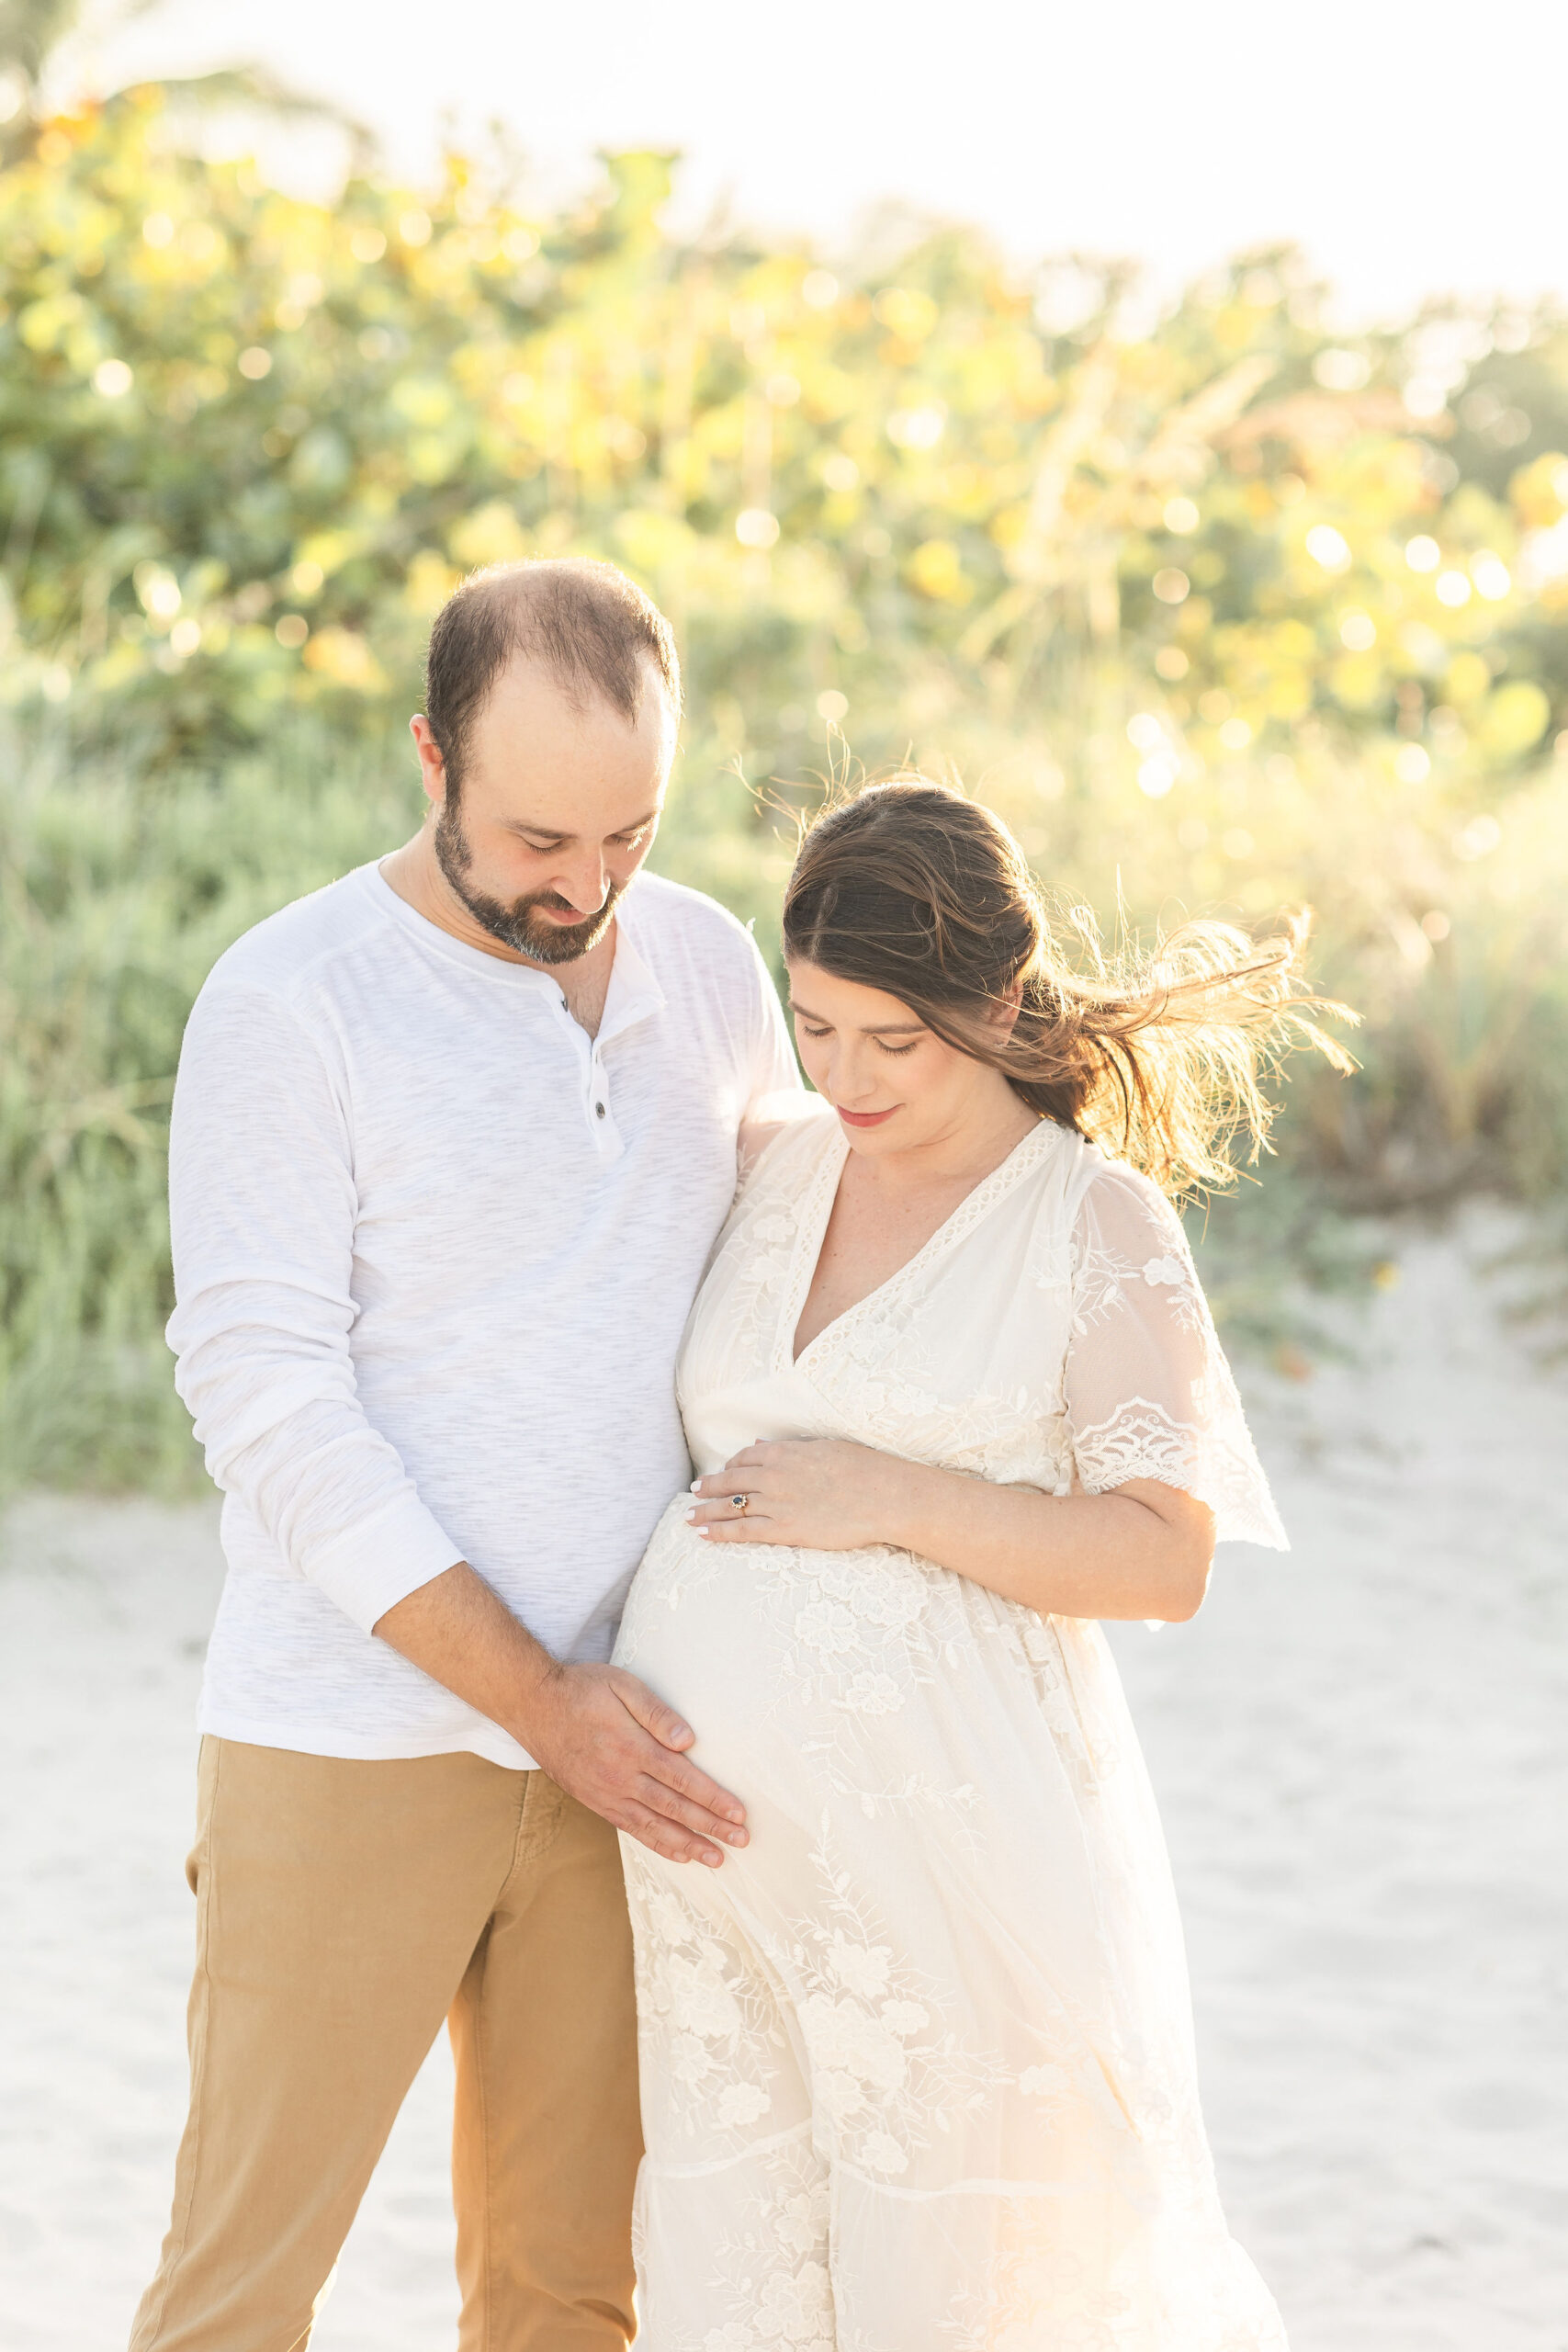 Expecting parents smile down at the bump while standing on a beach at sunset after visiting south miami hospital maternity